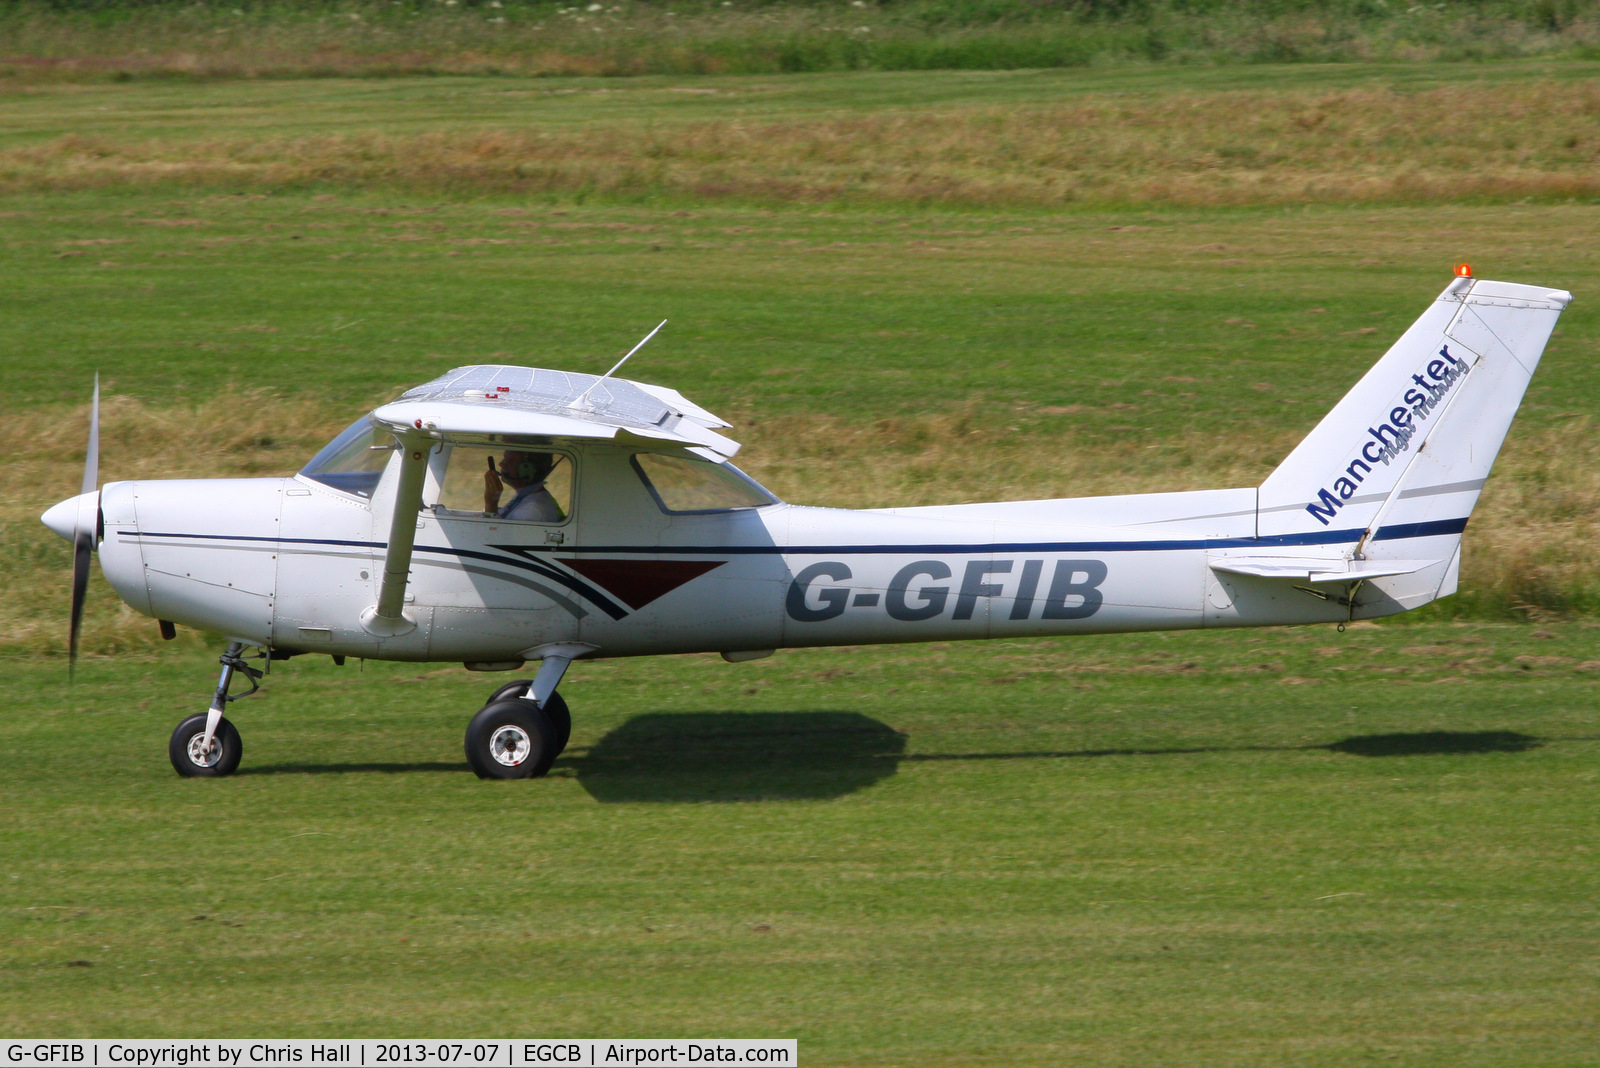 G-GFIB, 1979 Reims F152 C/N 1556, at the Barton open day and fly in